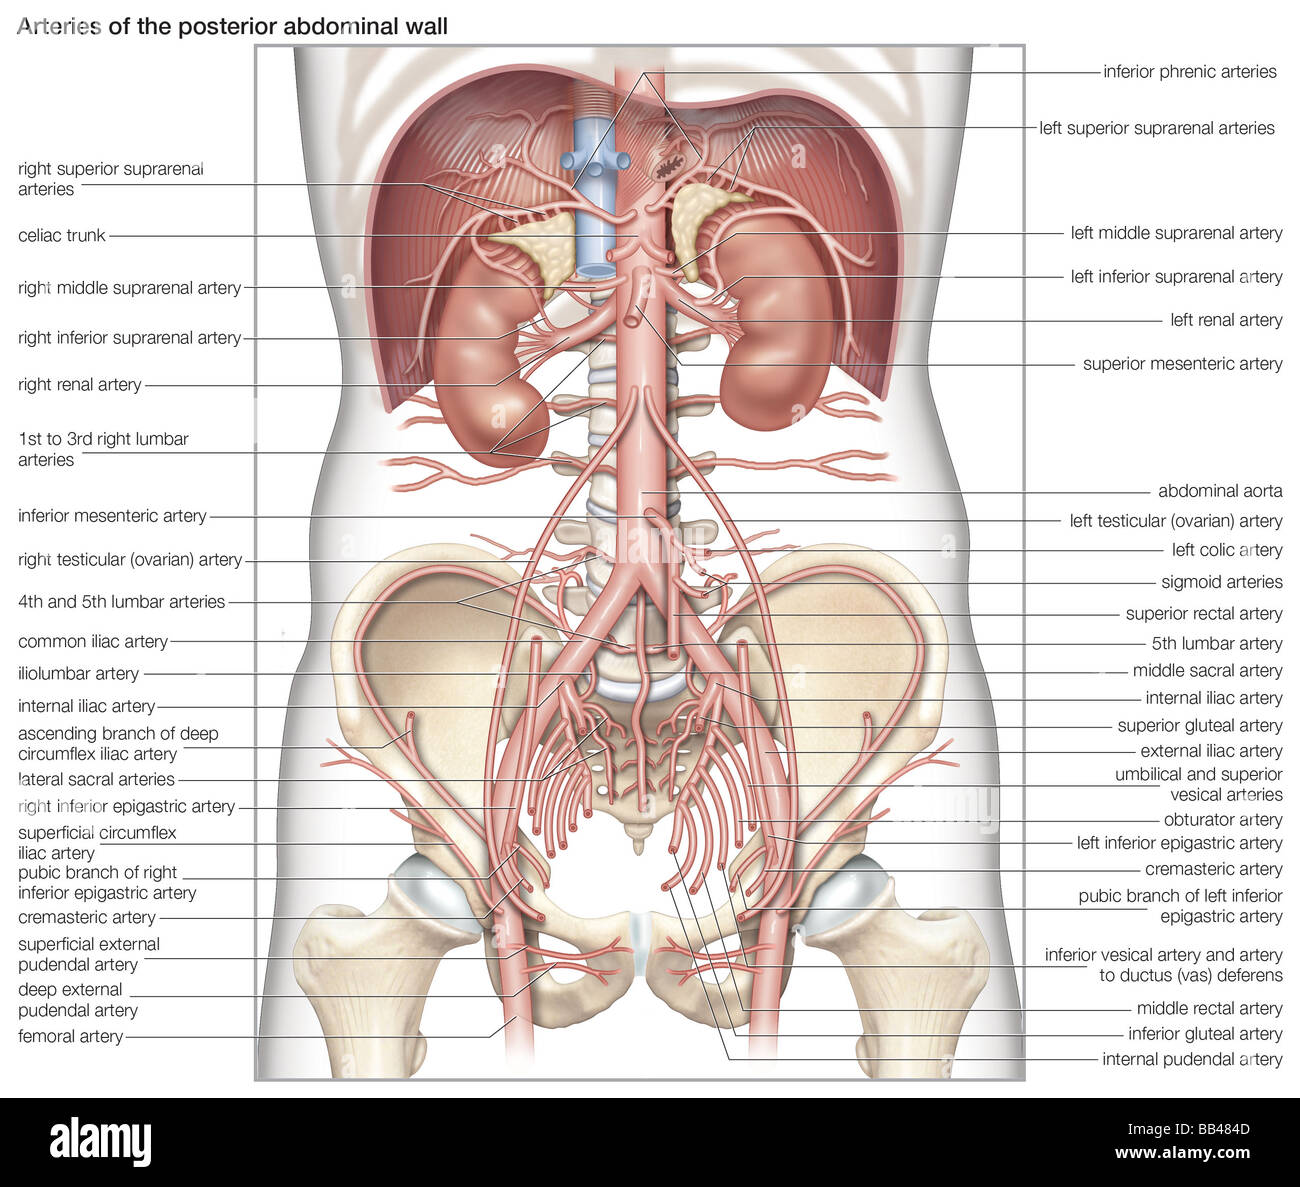 Arteries of the posterior abdominal wall Stock Photo - Alamy